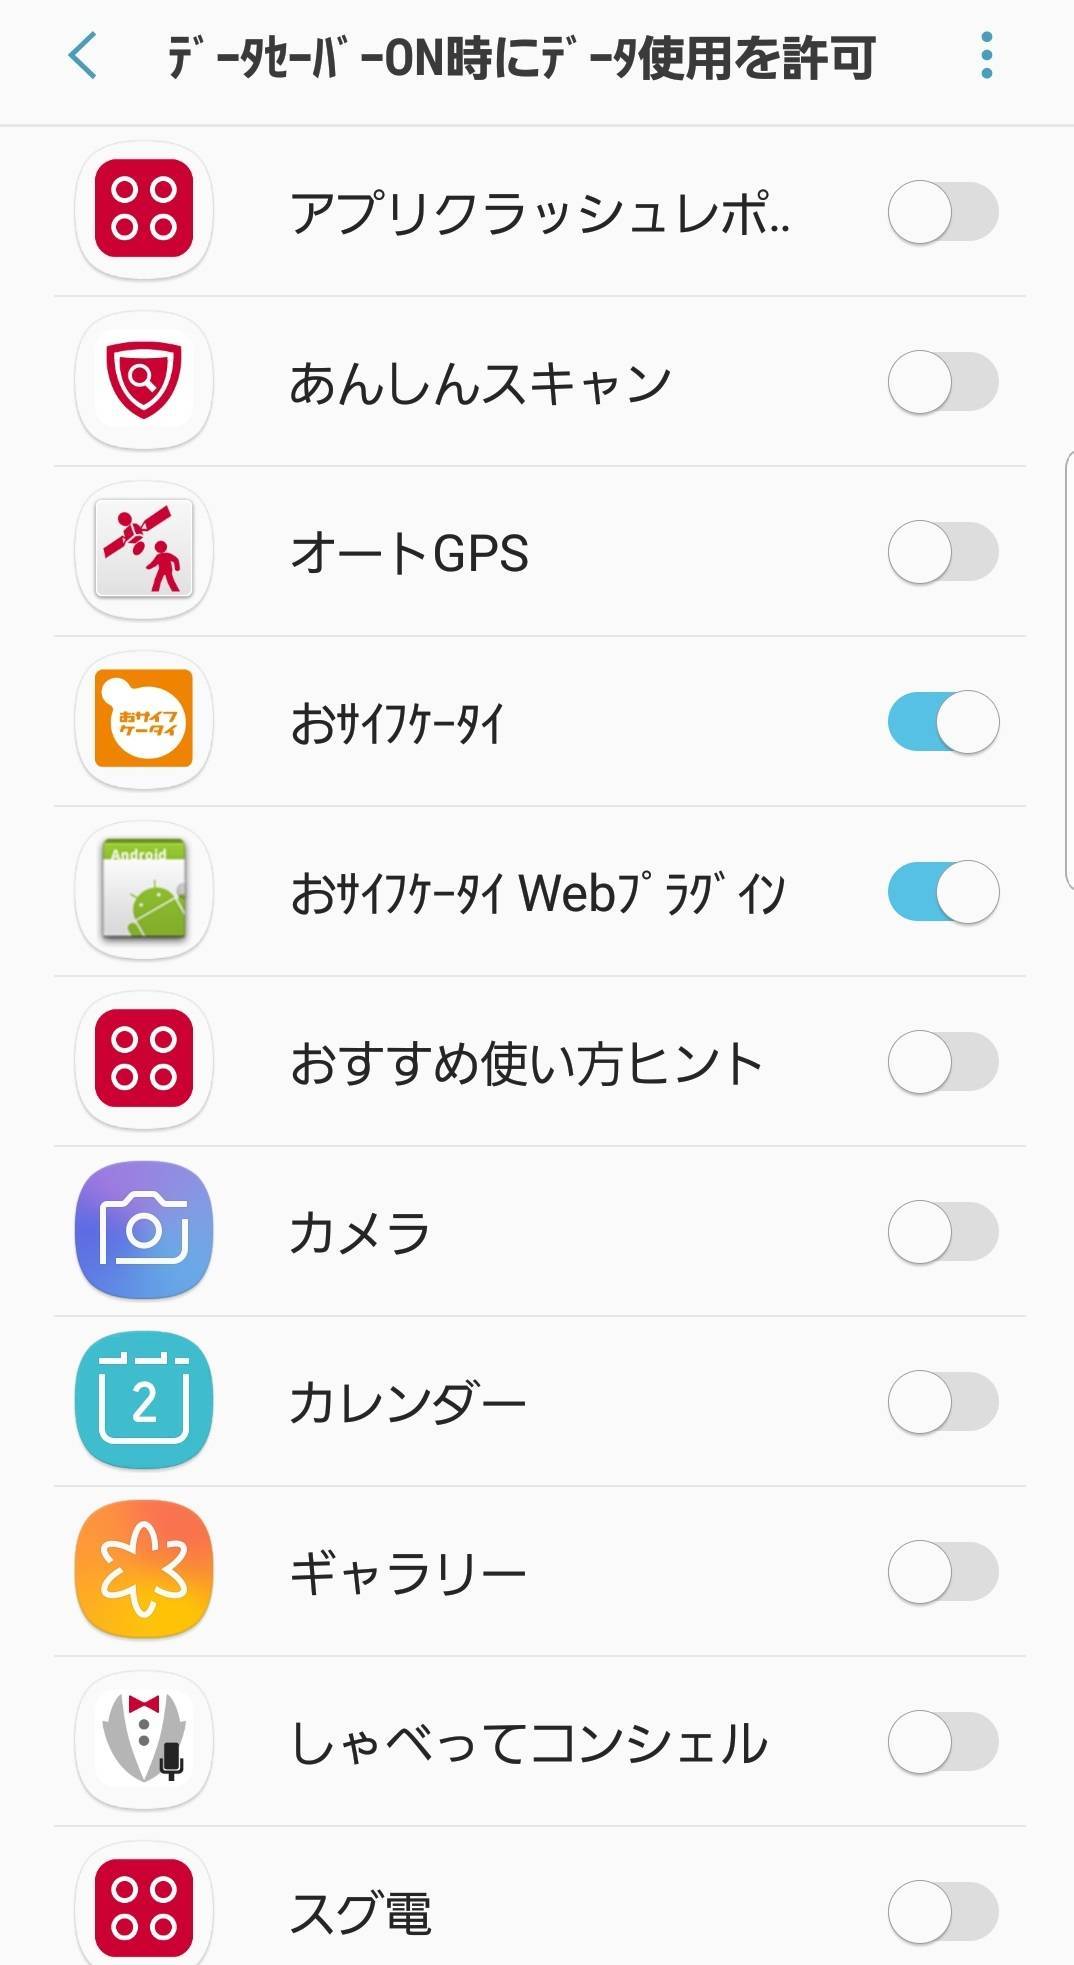 Androidスマホの通信量節約術 ギガ不足を解消するの方法 Appliv Topics